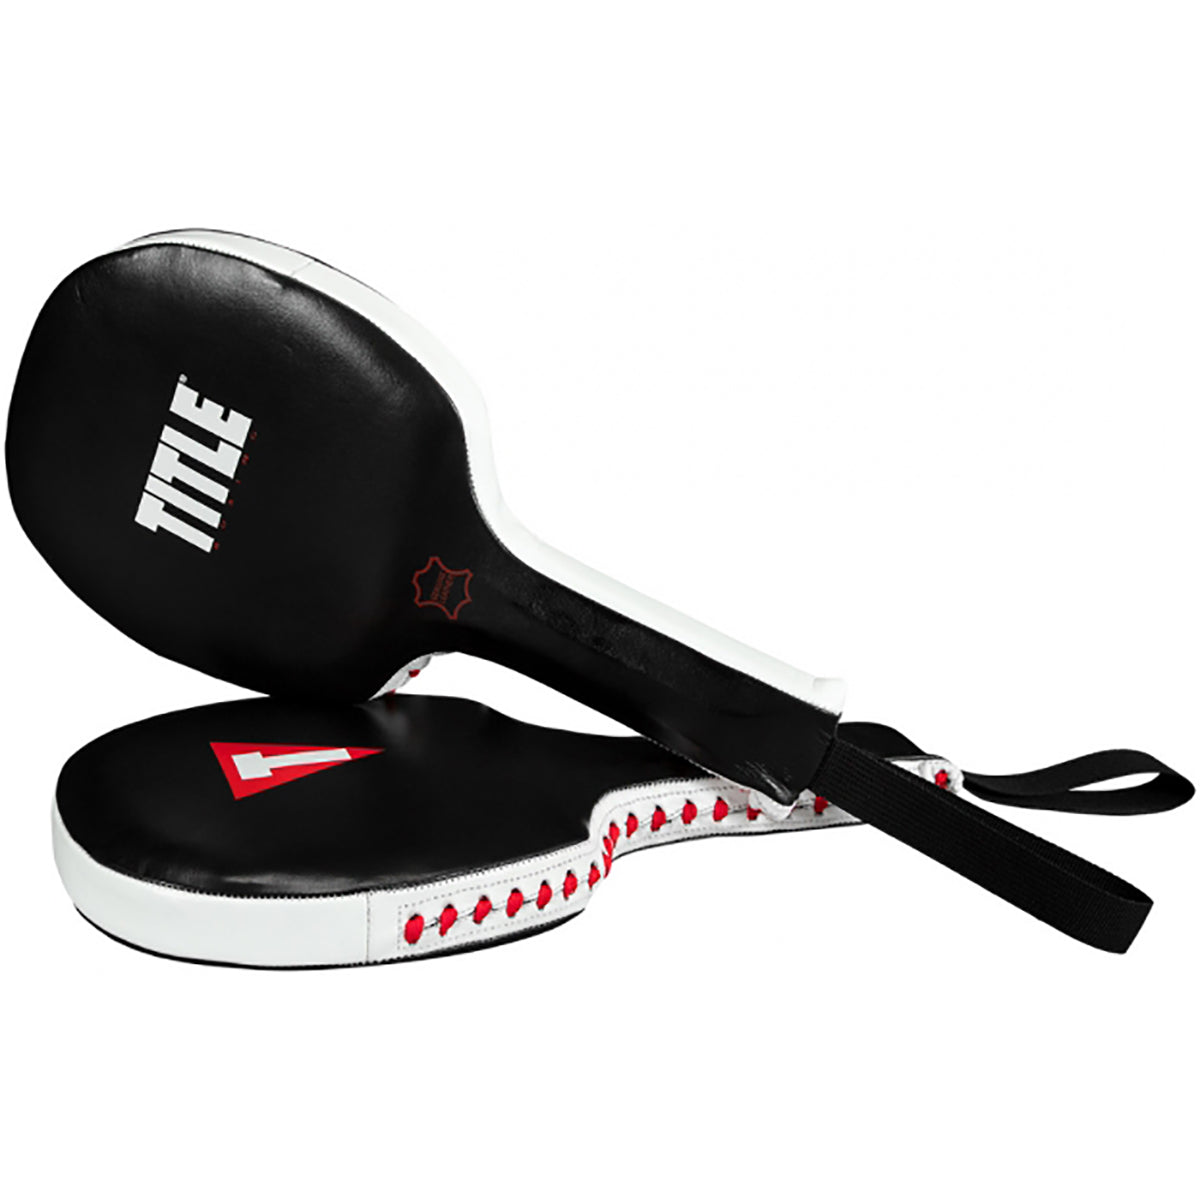 Title Boxing Punch Training Accuracy Paddles - Black Title Boxing